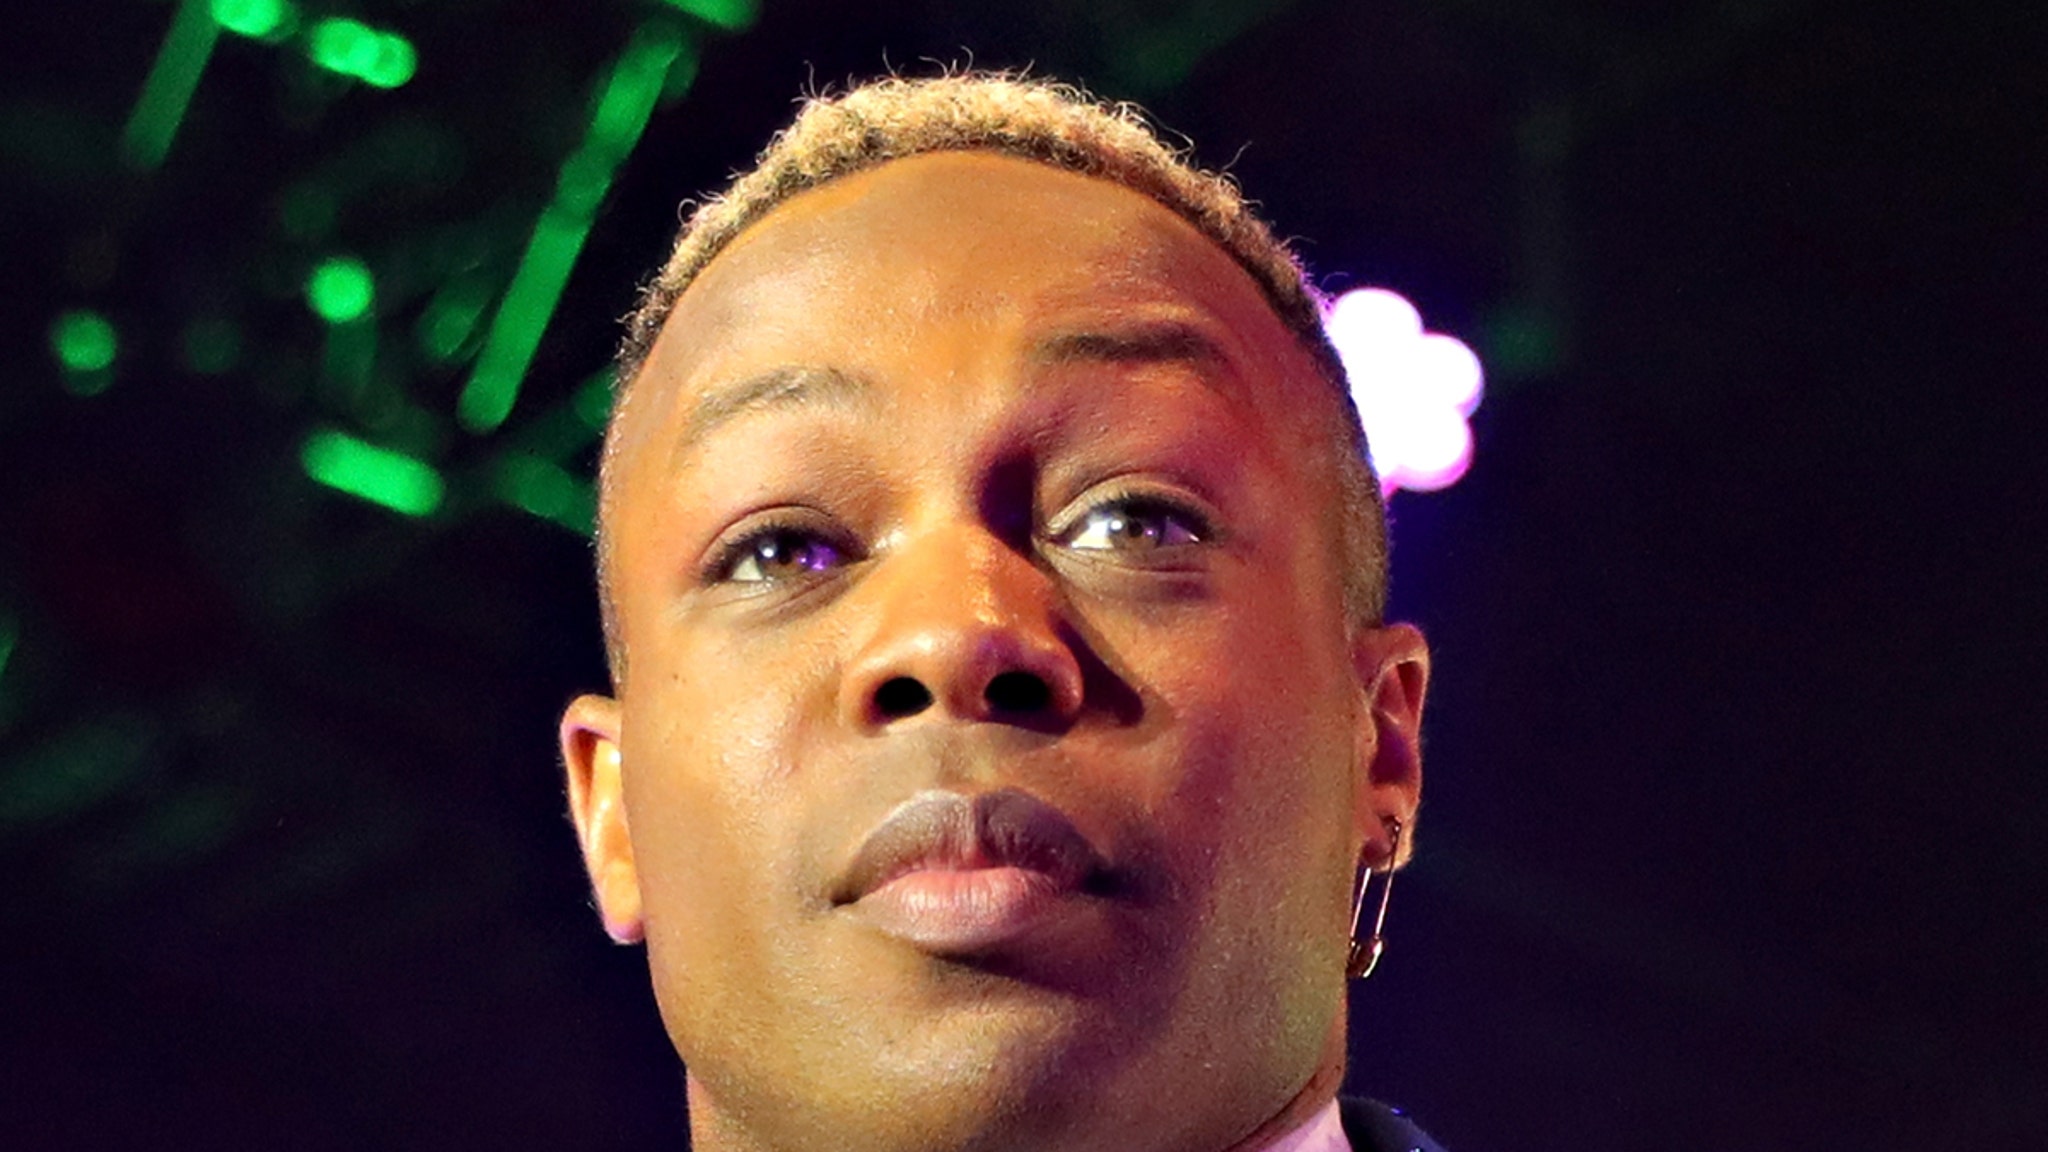 Todrick Hall's Home Burglary, Thieves Allegedly Steal $50k in Valuables